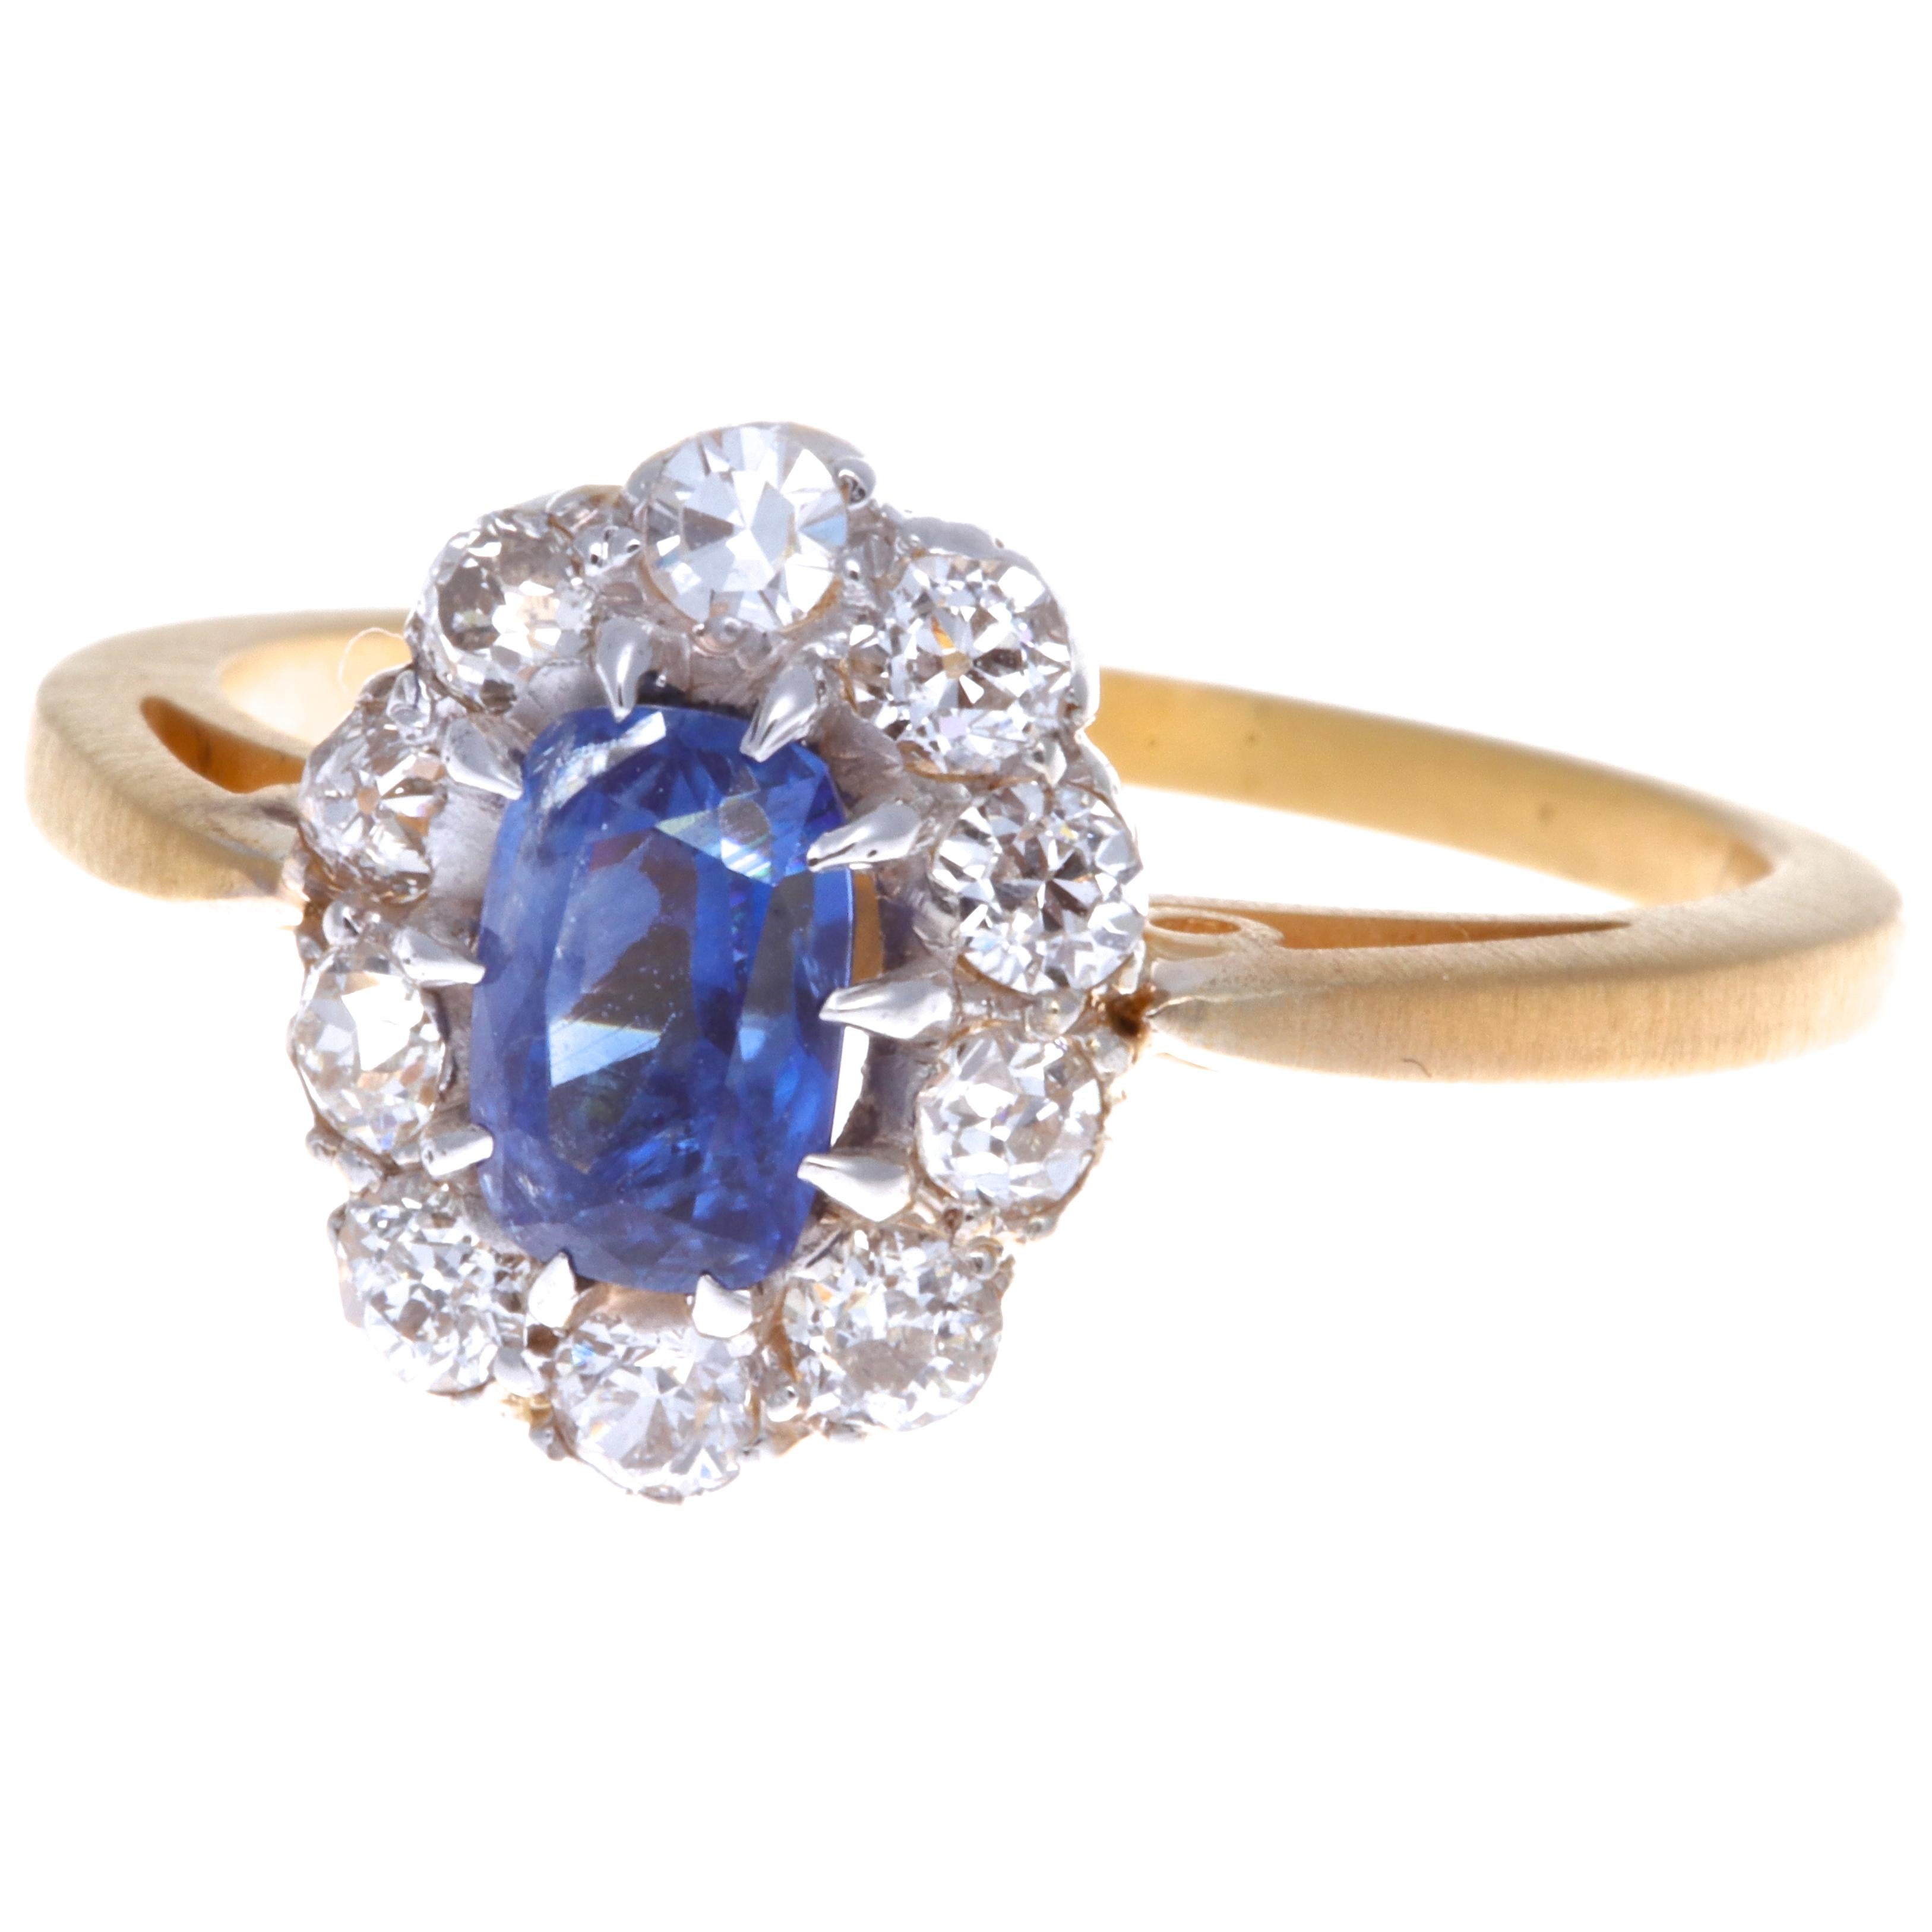 The combination of yellow gold and vibrant blue sapphire makes this a royal, timeless accessory. The key feature is the GIA 0.71 carat Kashmir no heat sapphire. Kashmir sapphires are known for their vivid, velvety cornflower blue. The color has been